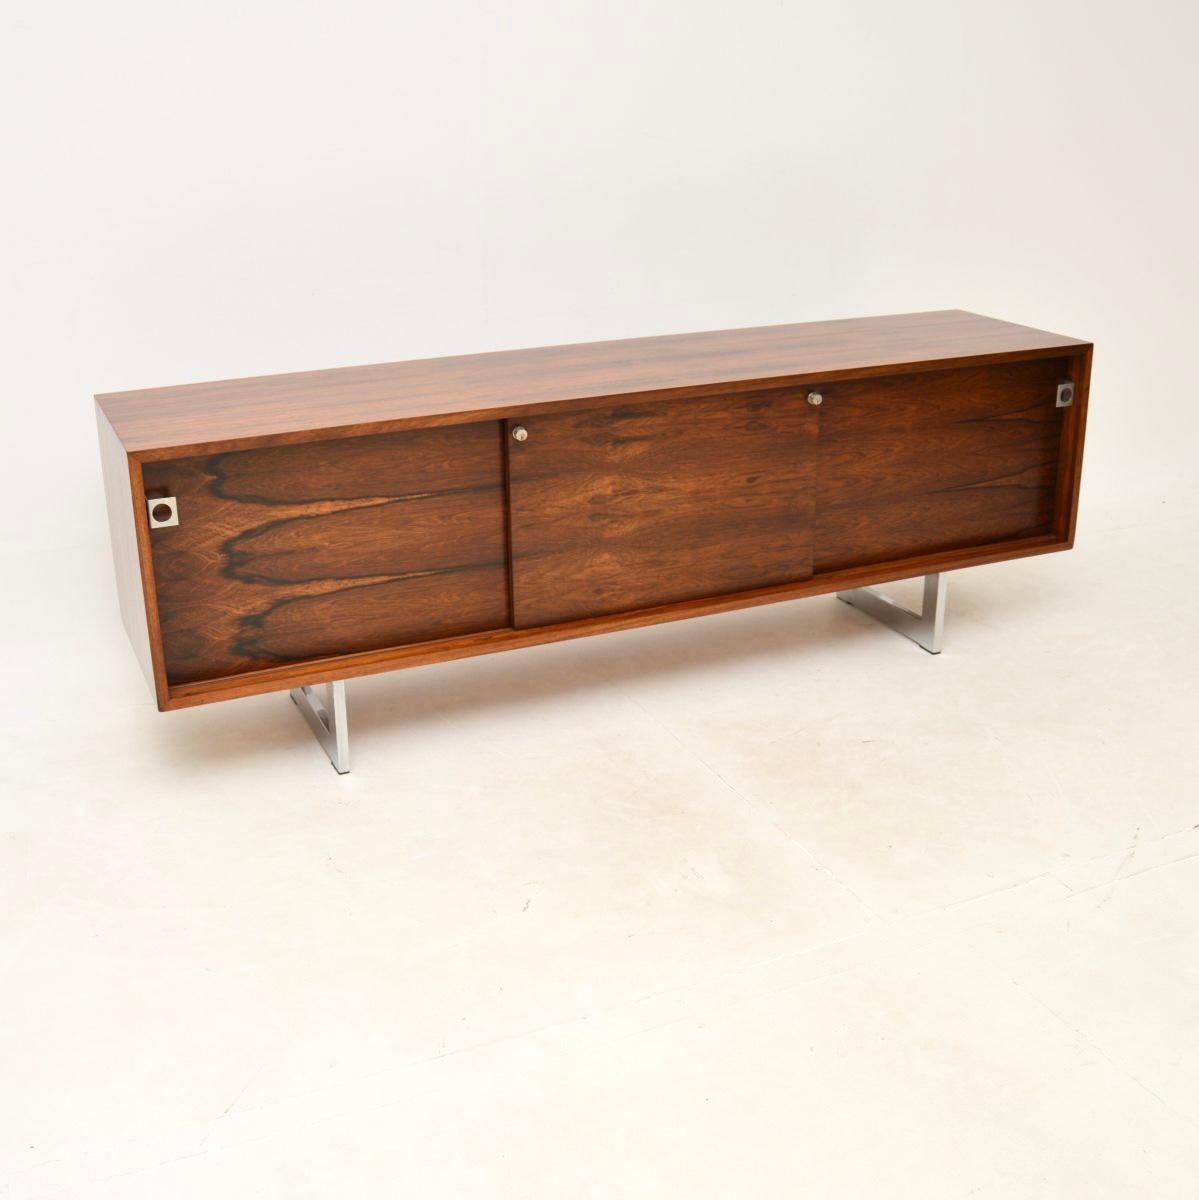 A stunning and extremely rare Danish vintage sideboard by Bodil Kjaer. This was designed in 1959 as part of a whole office range, this piece dates from the 1960’s. It was made in Denmark by E. Pedersen & Søn.

The quality is outstanding, it is a